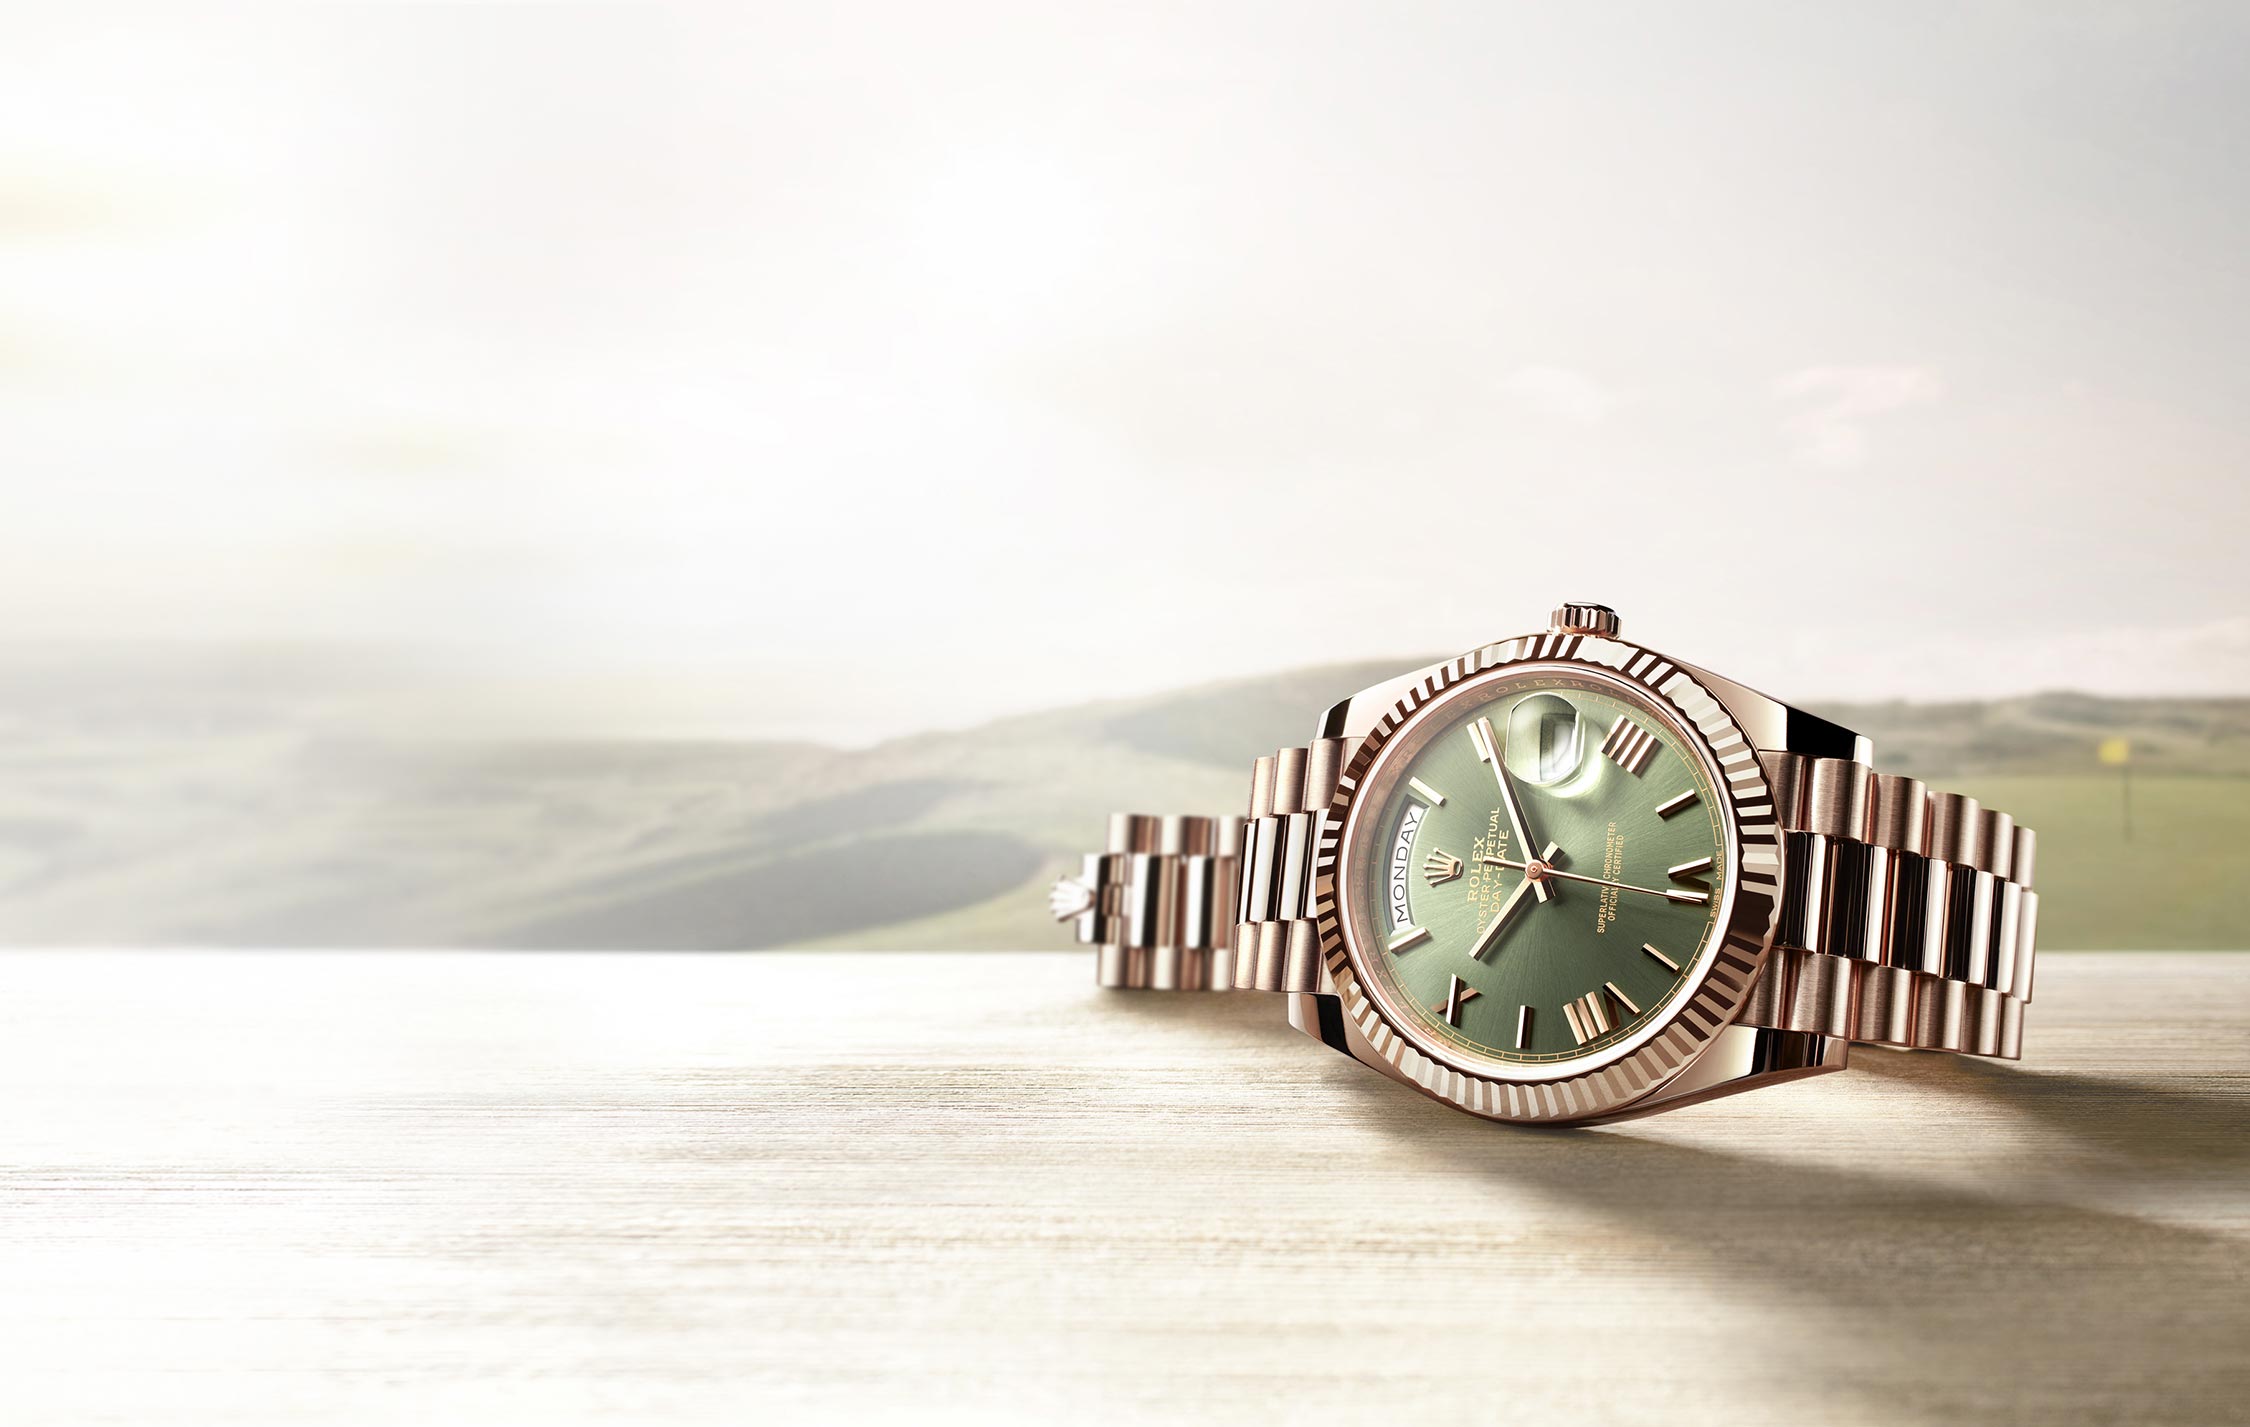 Rolex crown reigns king of all timepieces